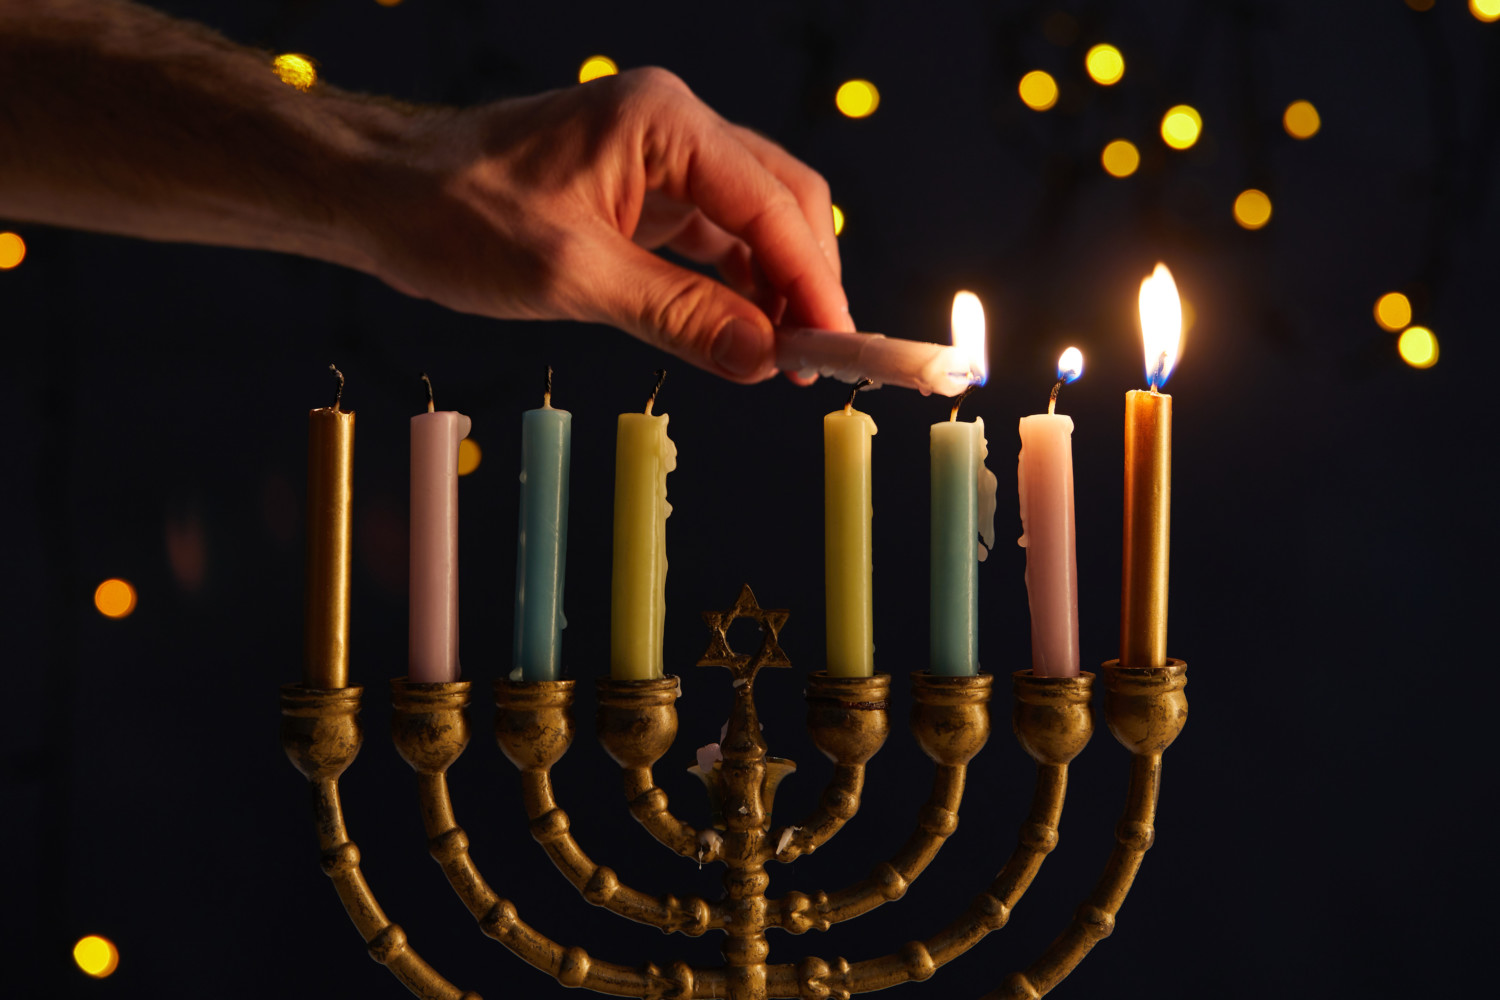 cropped view of man lighting up candles in menorah on black back